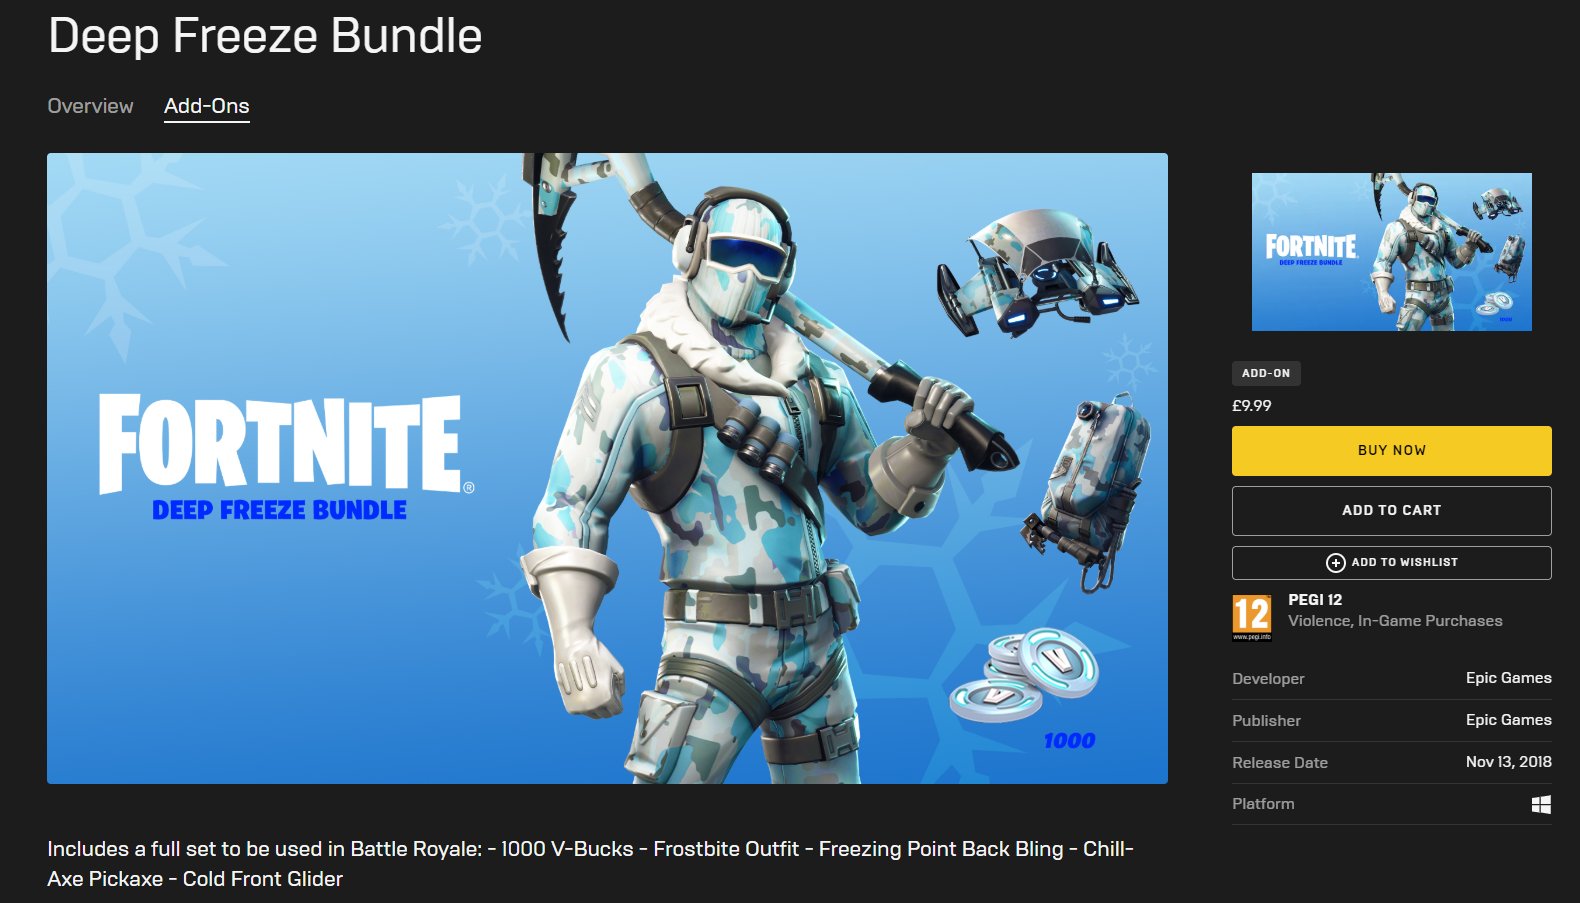 byld Bar Skubbe Fortnite News on Twitter: "The Deep Freeze Bundle has returned to the Epic  Games Store. If you already own the cosmetics, you can buy the pack again  to receive 3,000 V-Bucks for